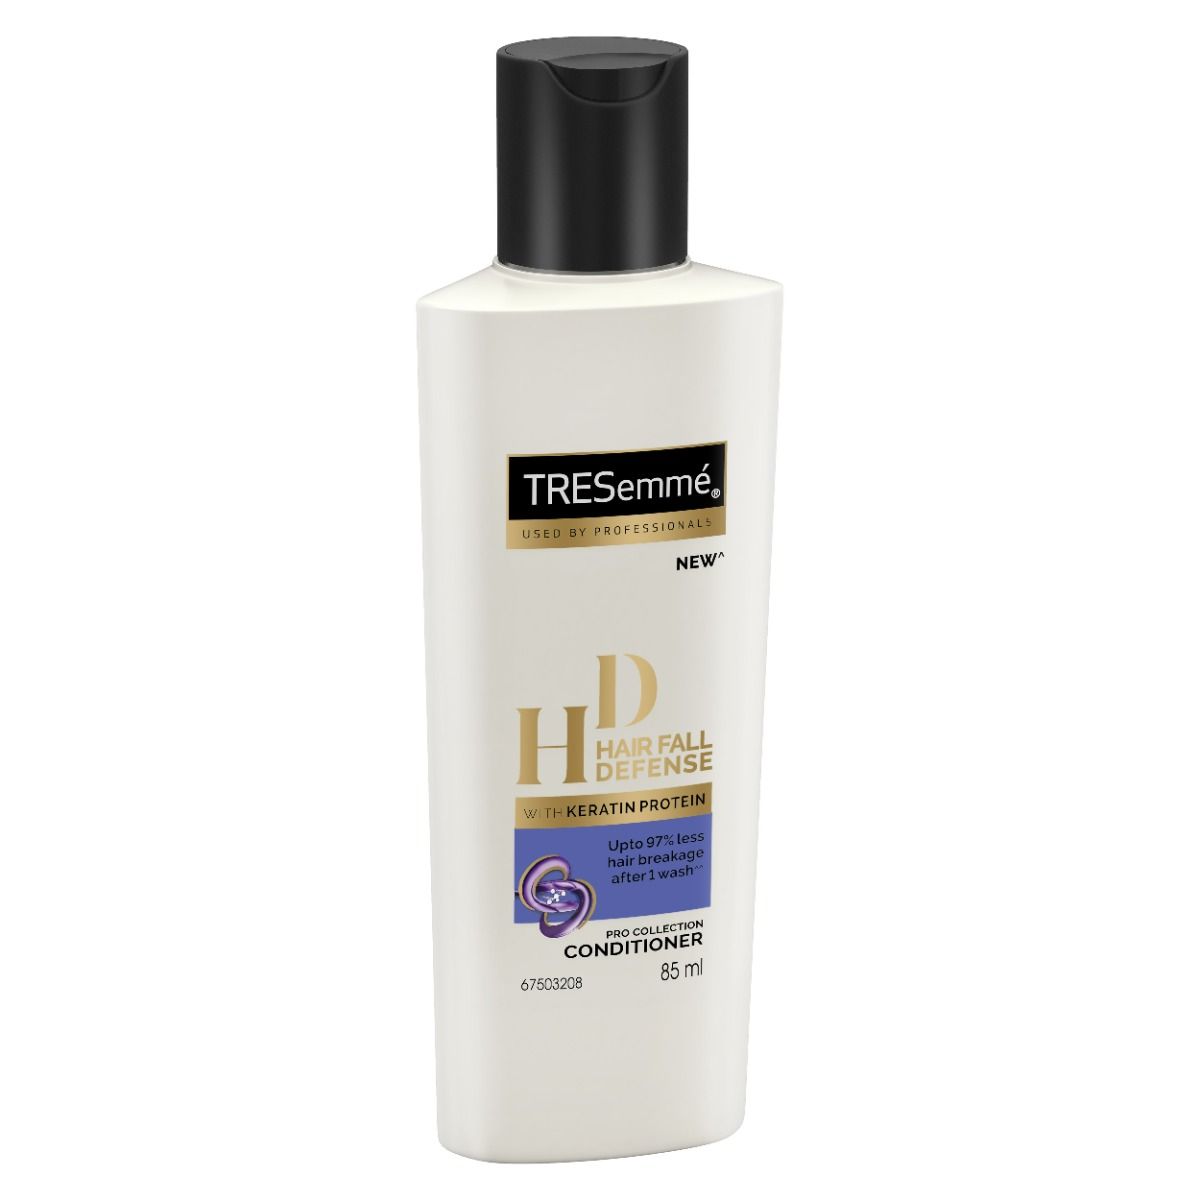 Tresemme Hair Fall Defense Conditioner, 85 ml, Pack of 1 